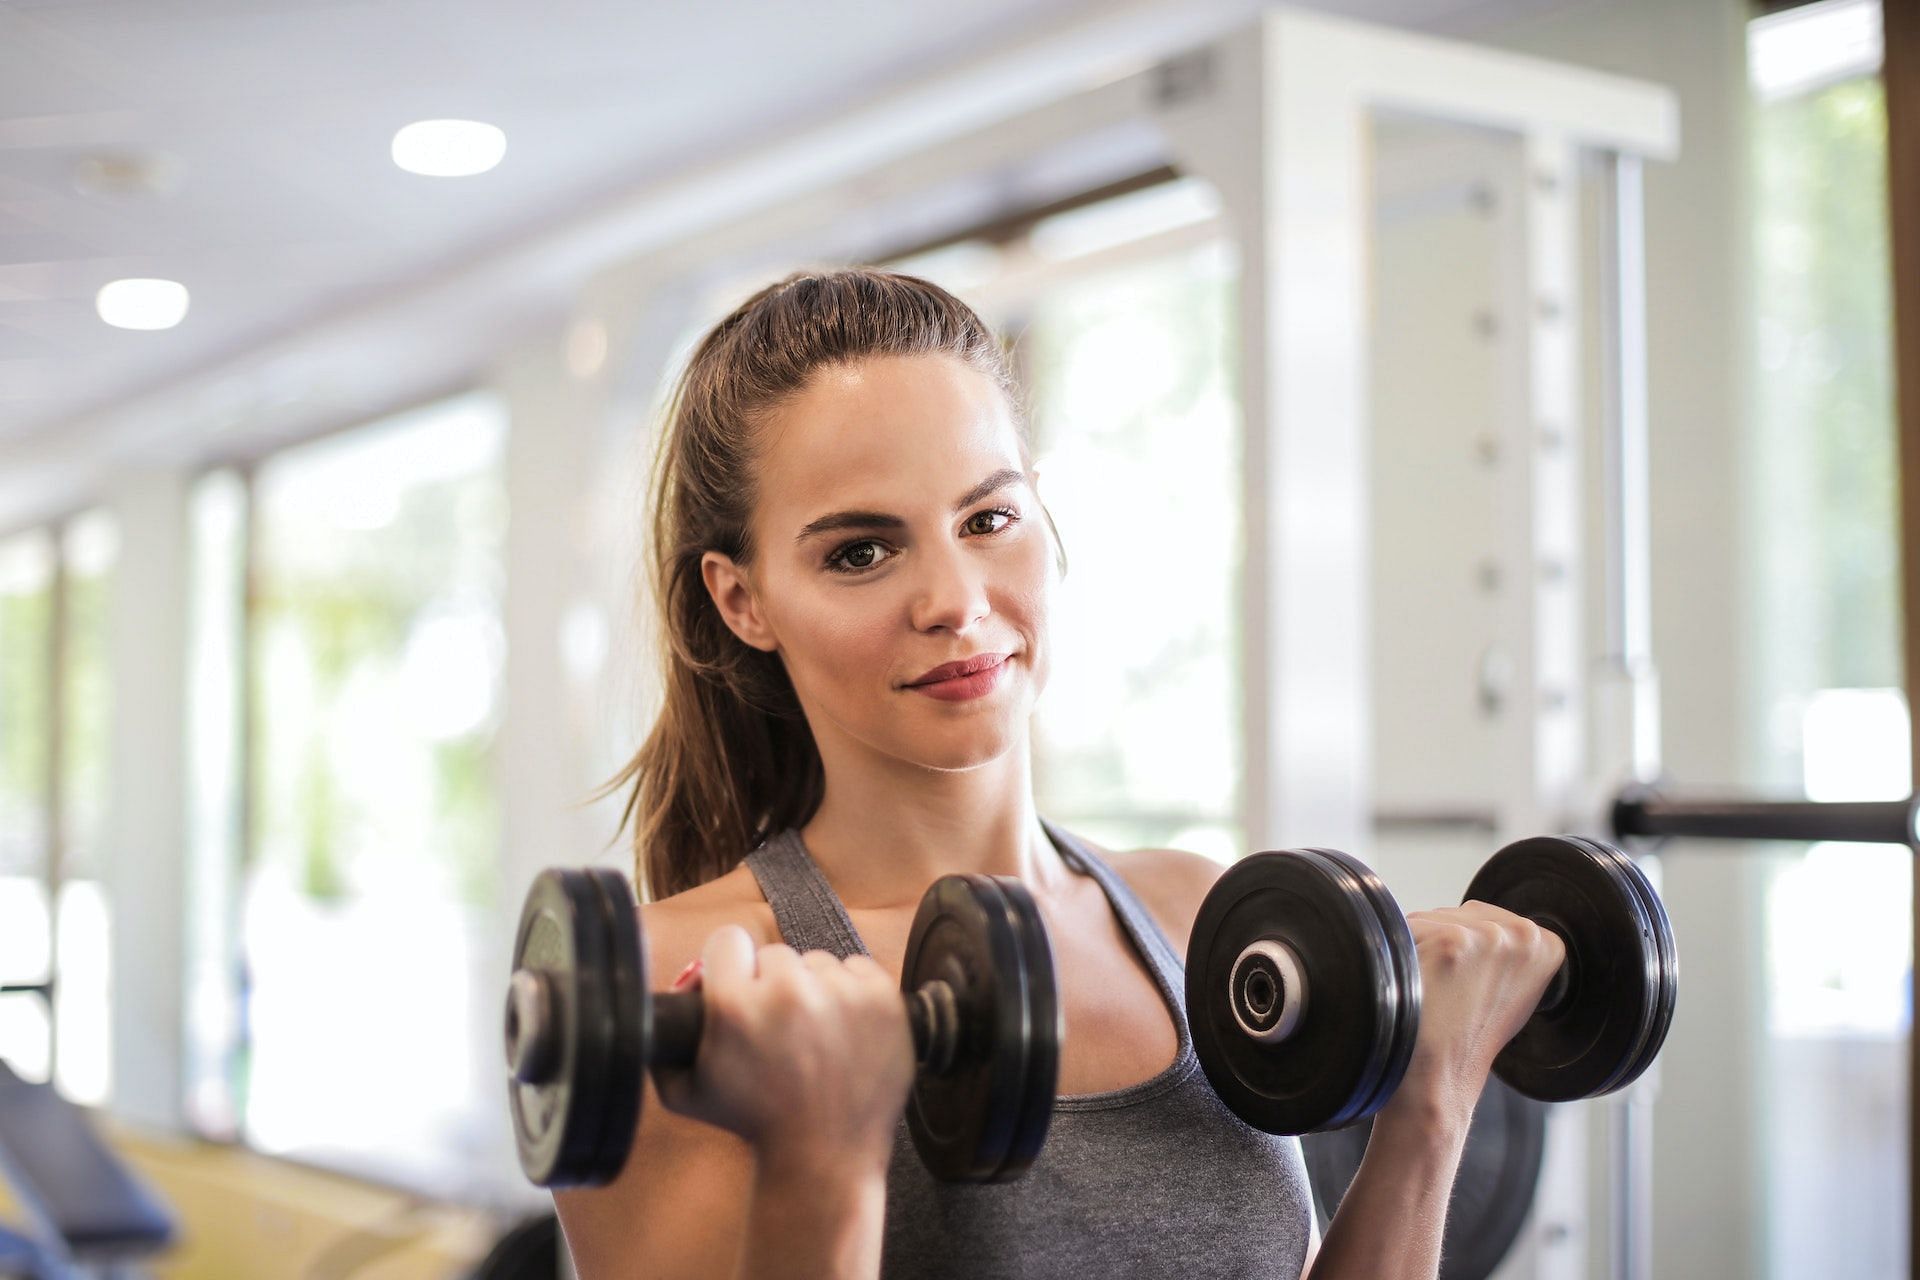 Full-body dumbbell workouts target the major muscles in the body. (Photo via Pexels/Andrea Piacquadio)